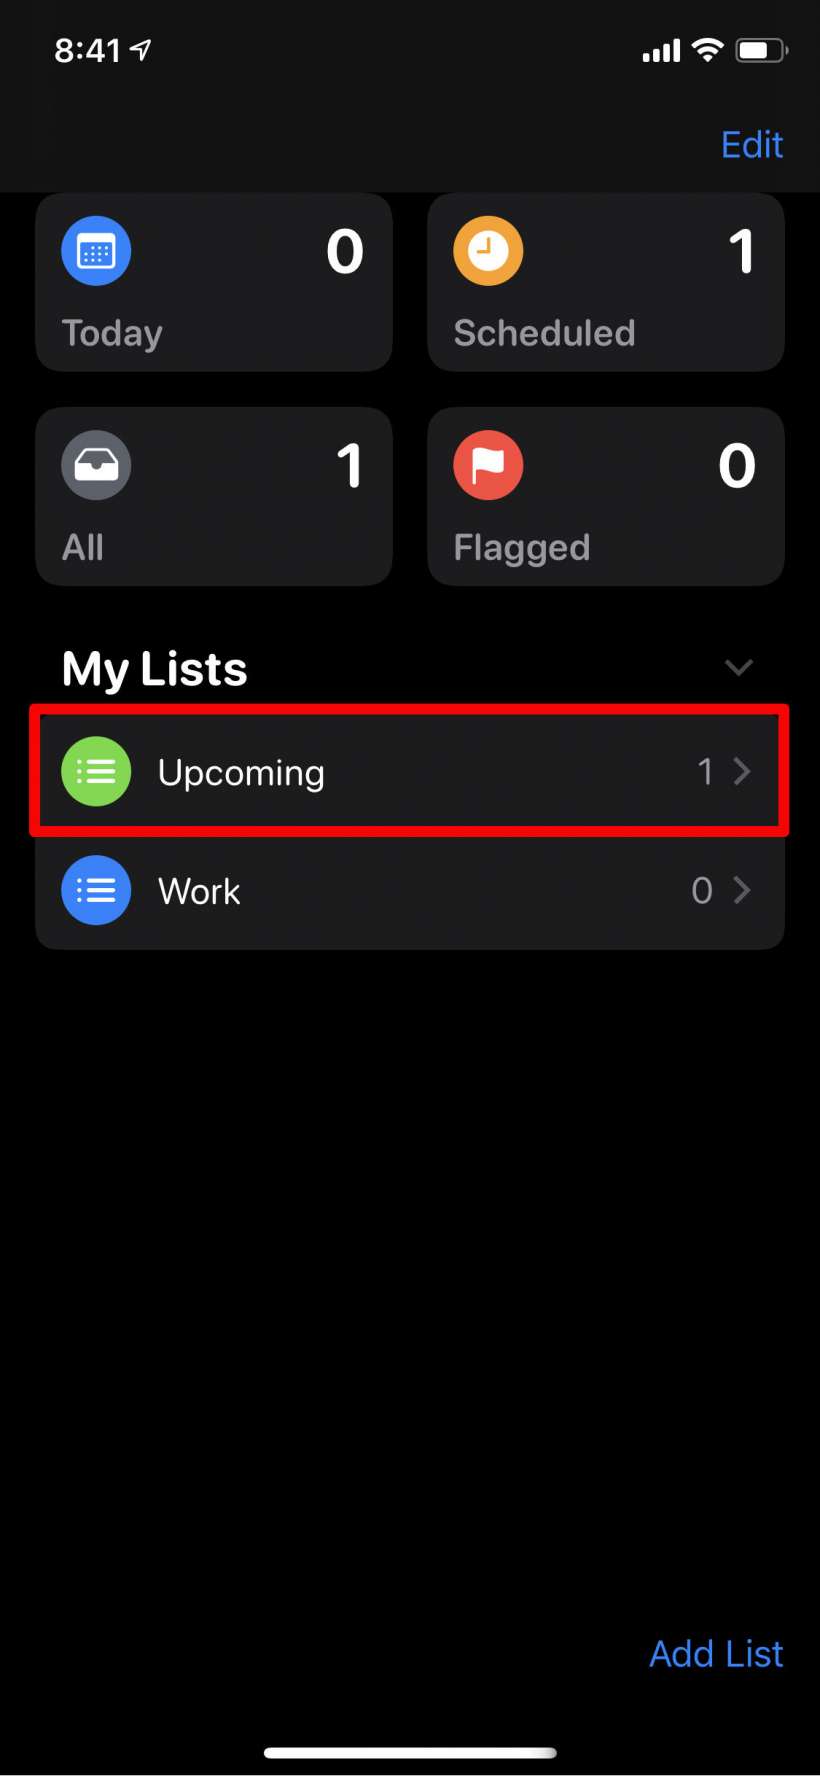 How to attach images and scanned documents to your Reminders on iPhone and iPad.